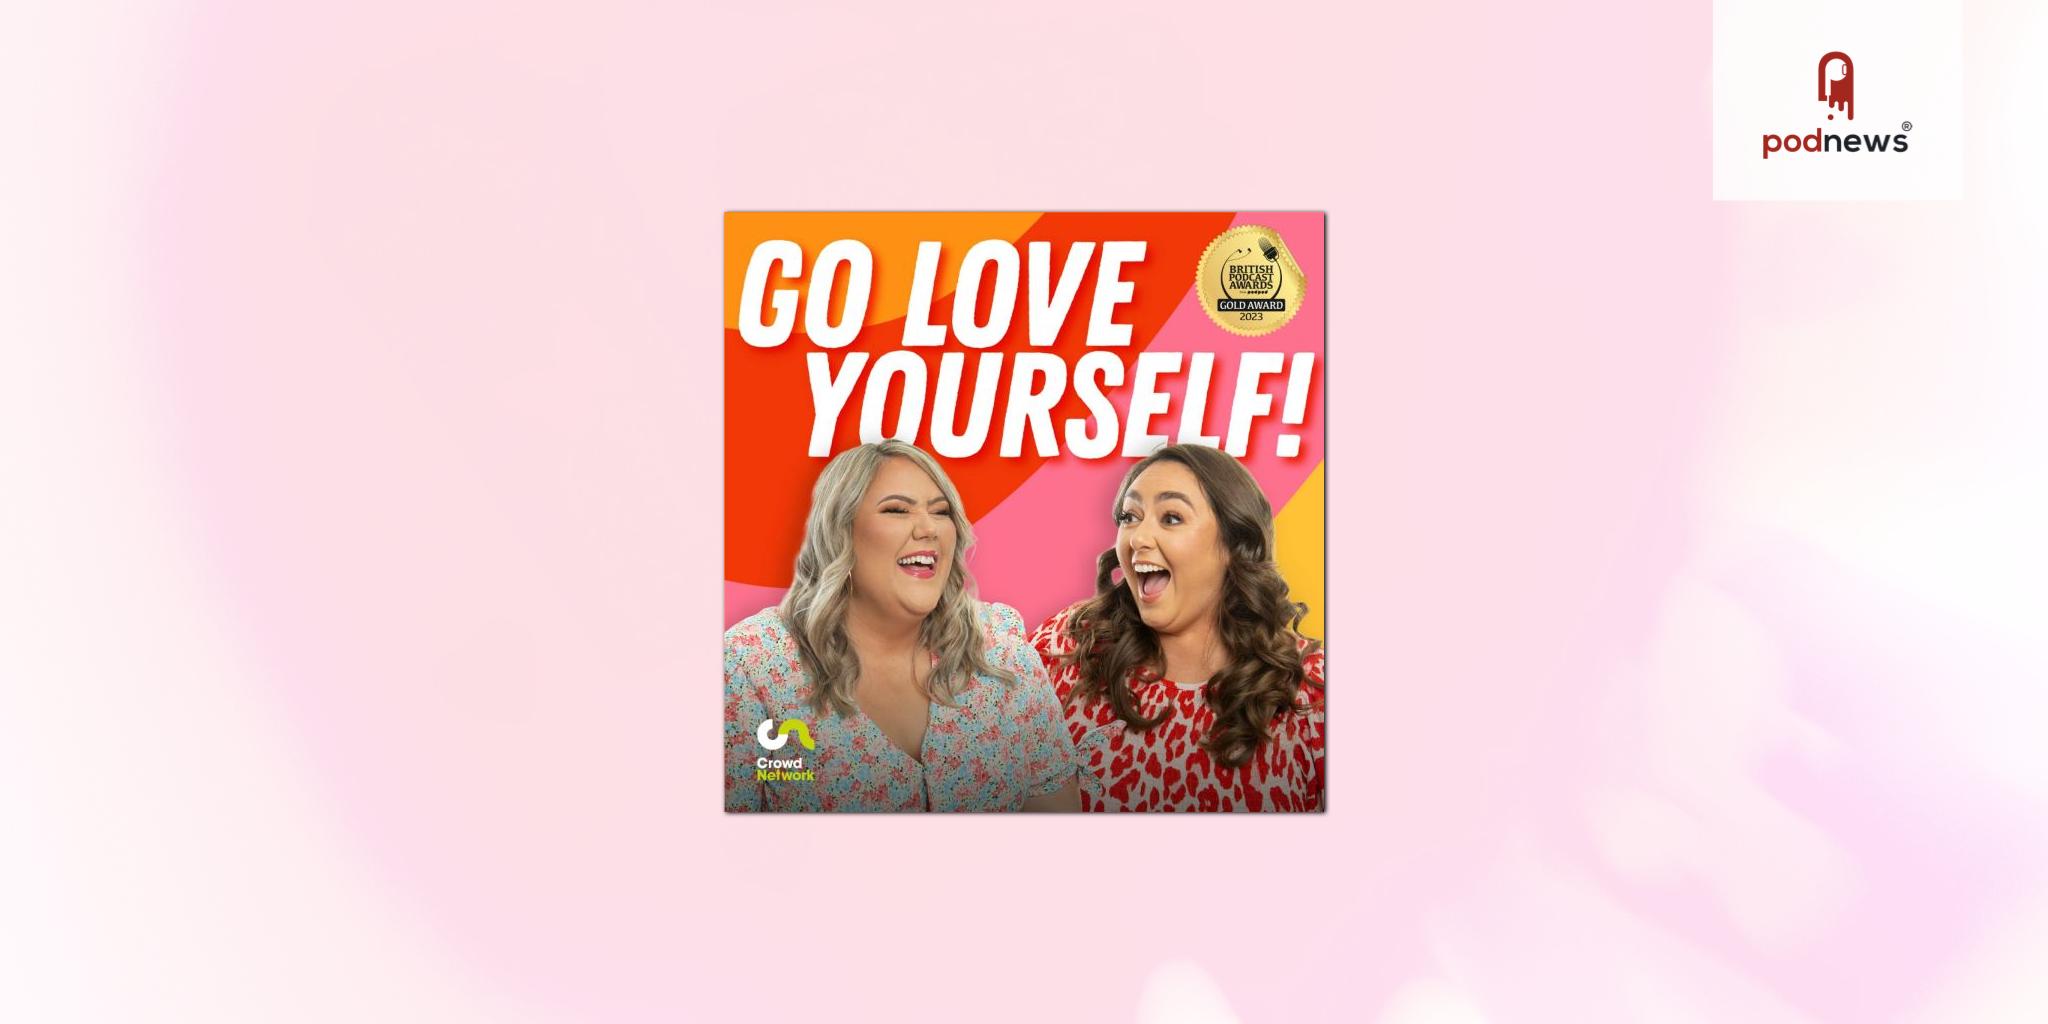 Popular podcast Go Love Yourself back for series two